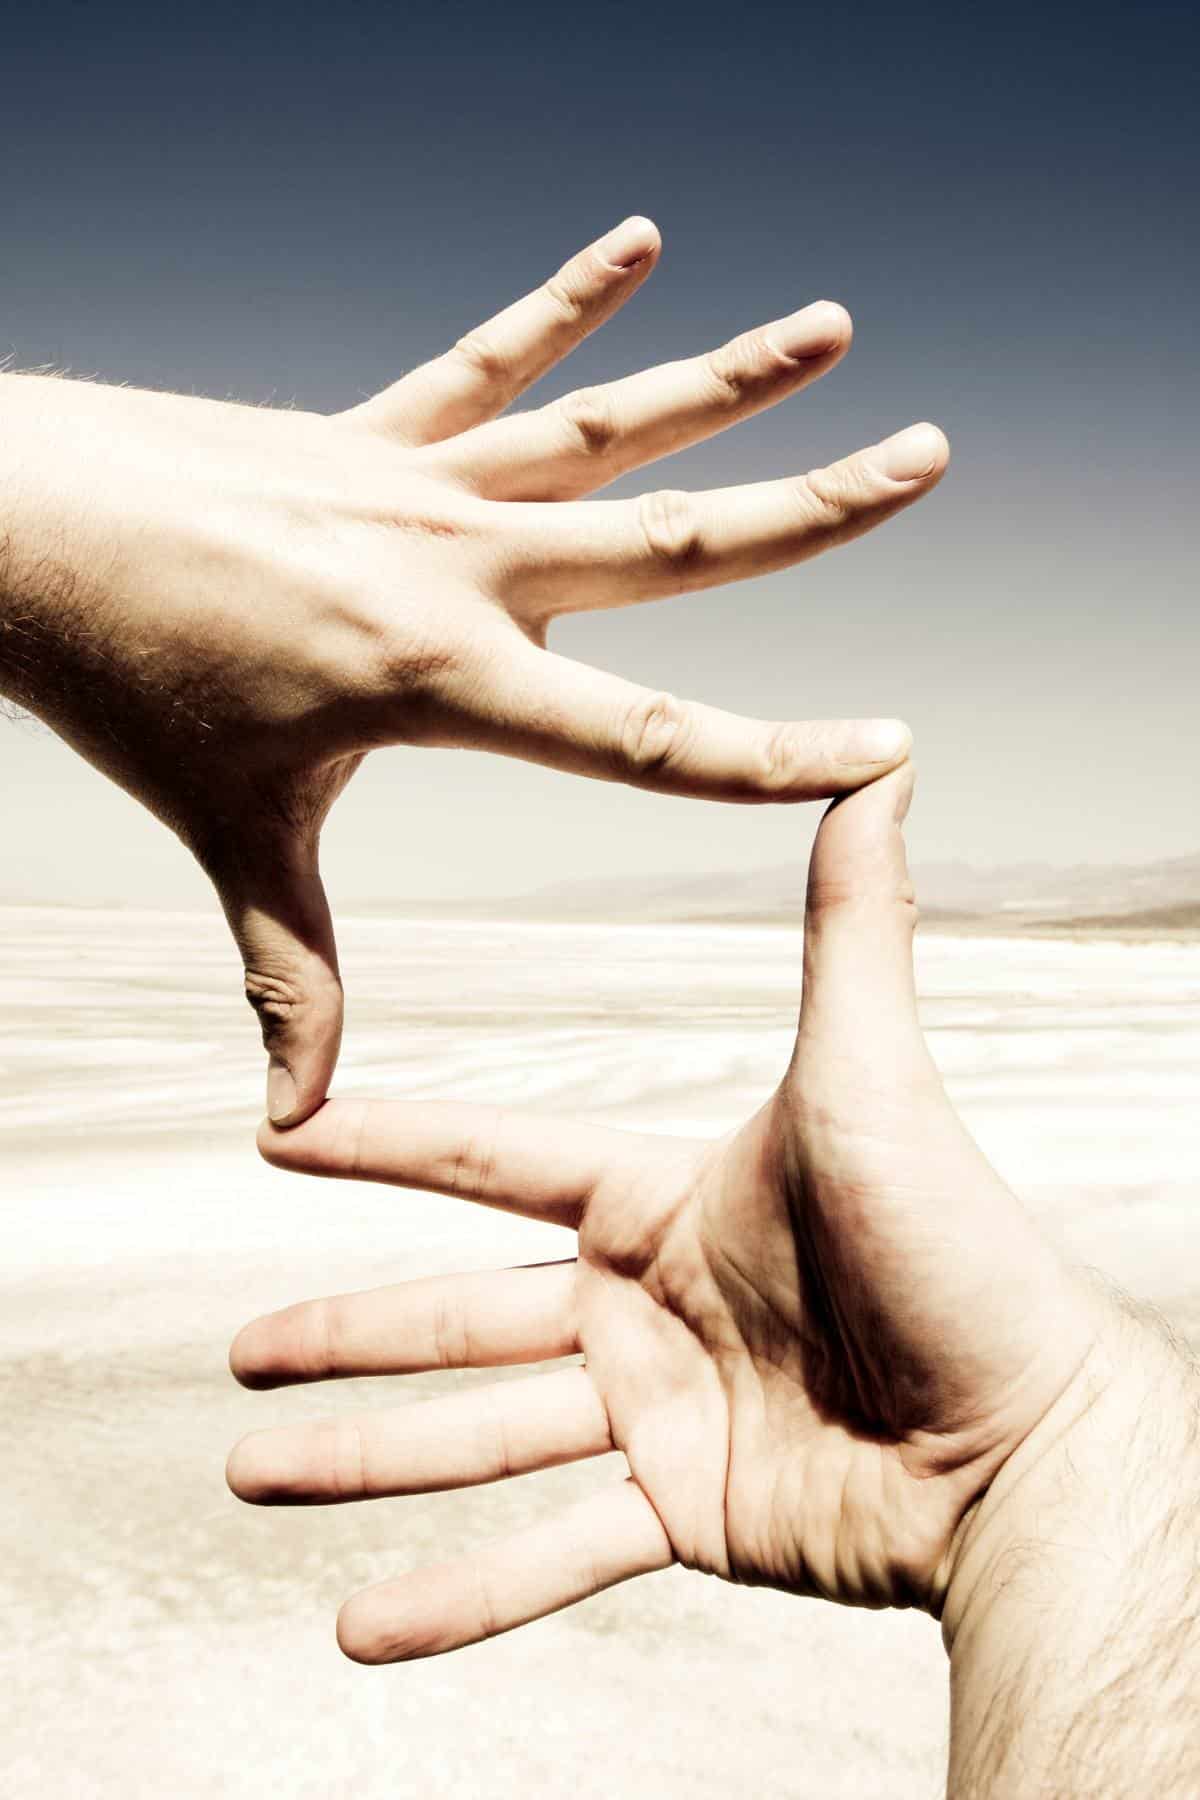 A hand making she shape of a frame with a desert in the background